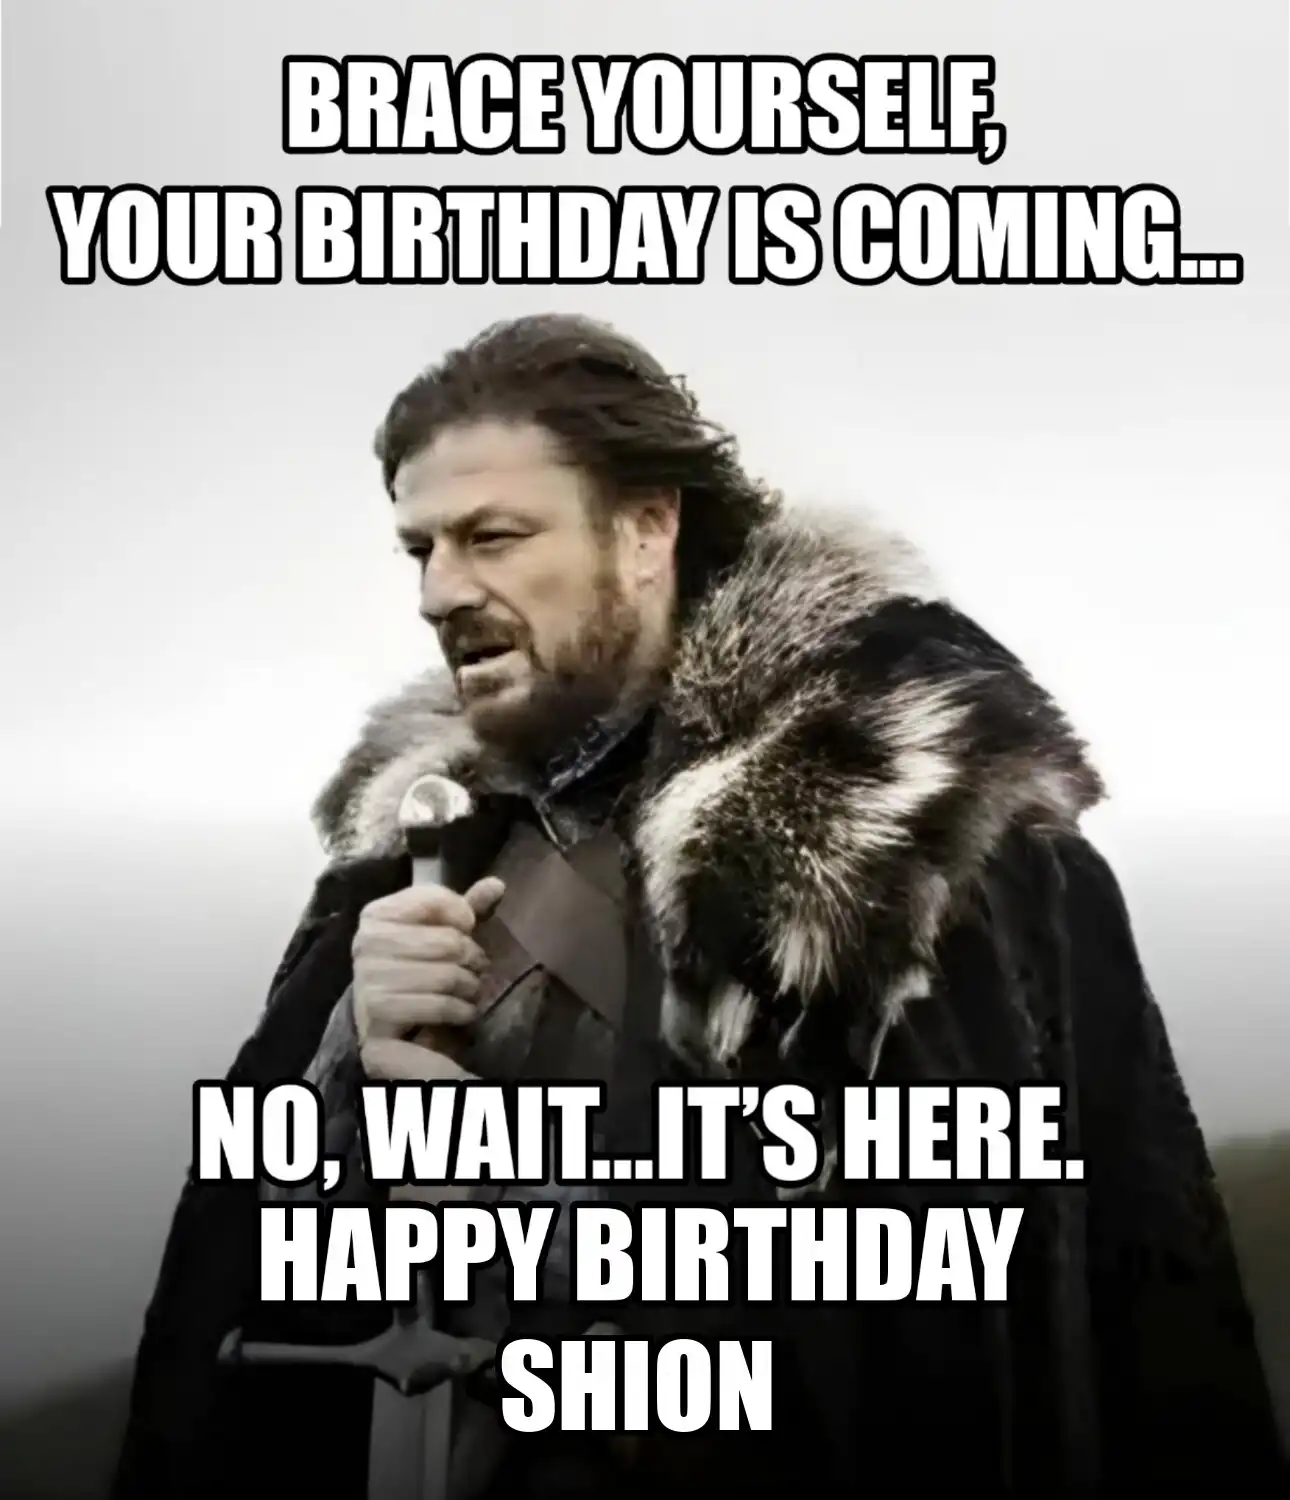 Happy Birthday Shion Brace Yourself Your Birthday Is Coming Meme